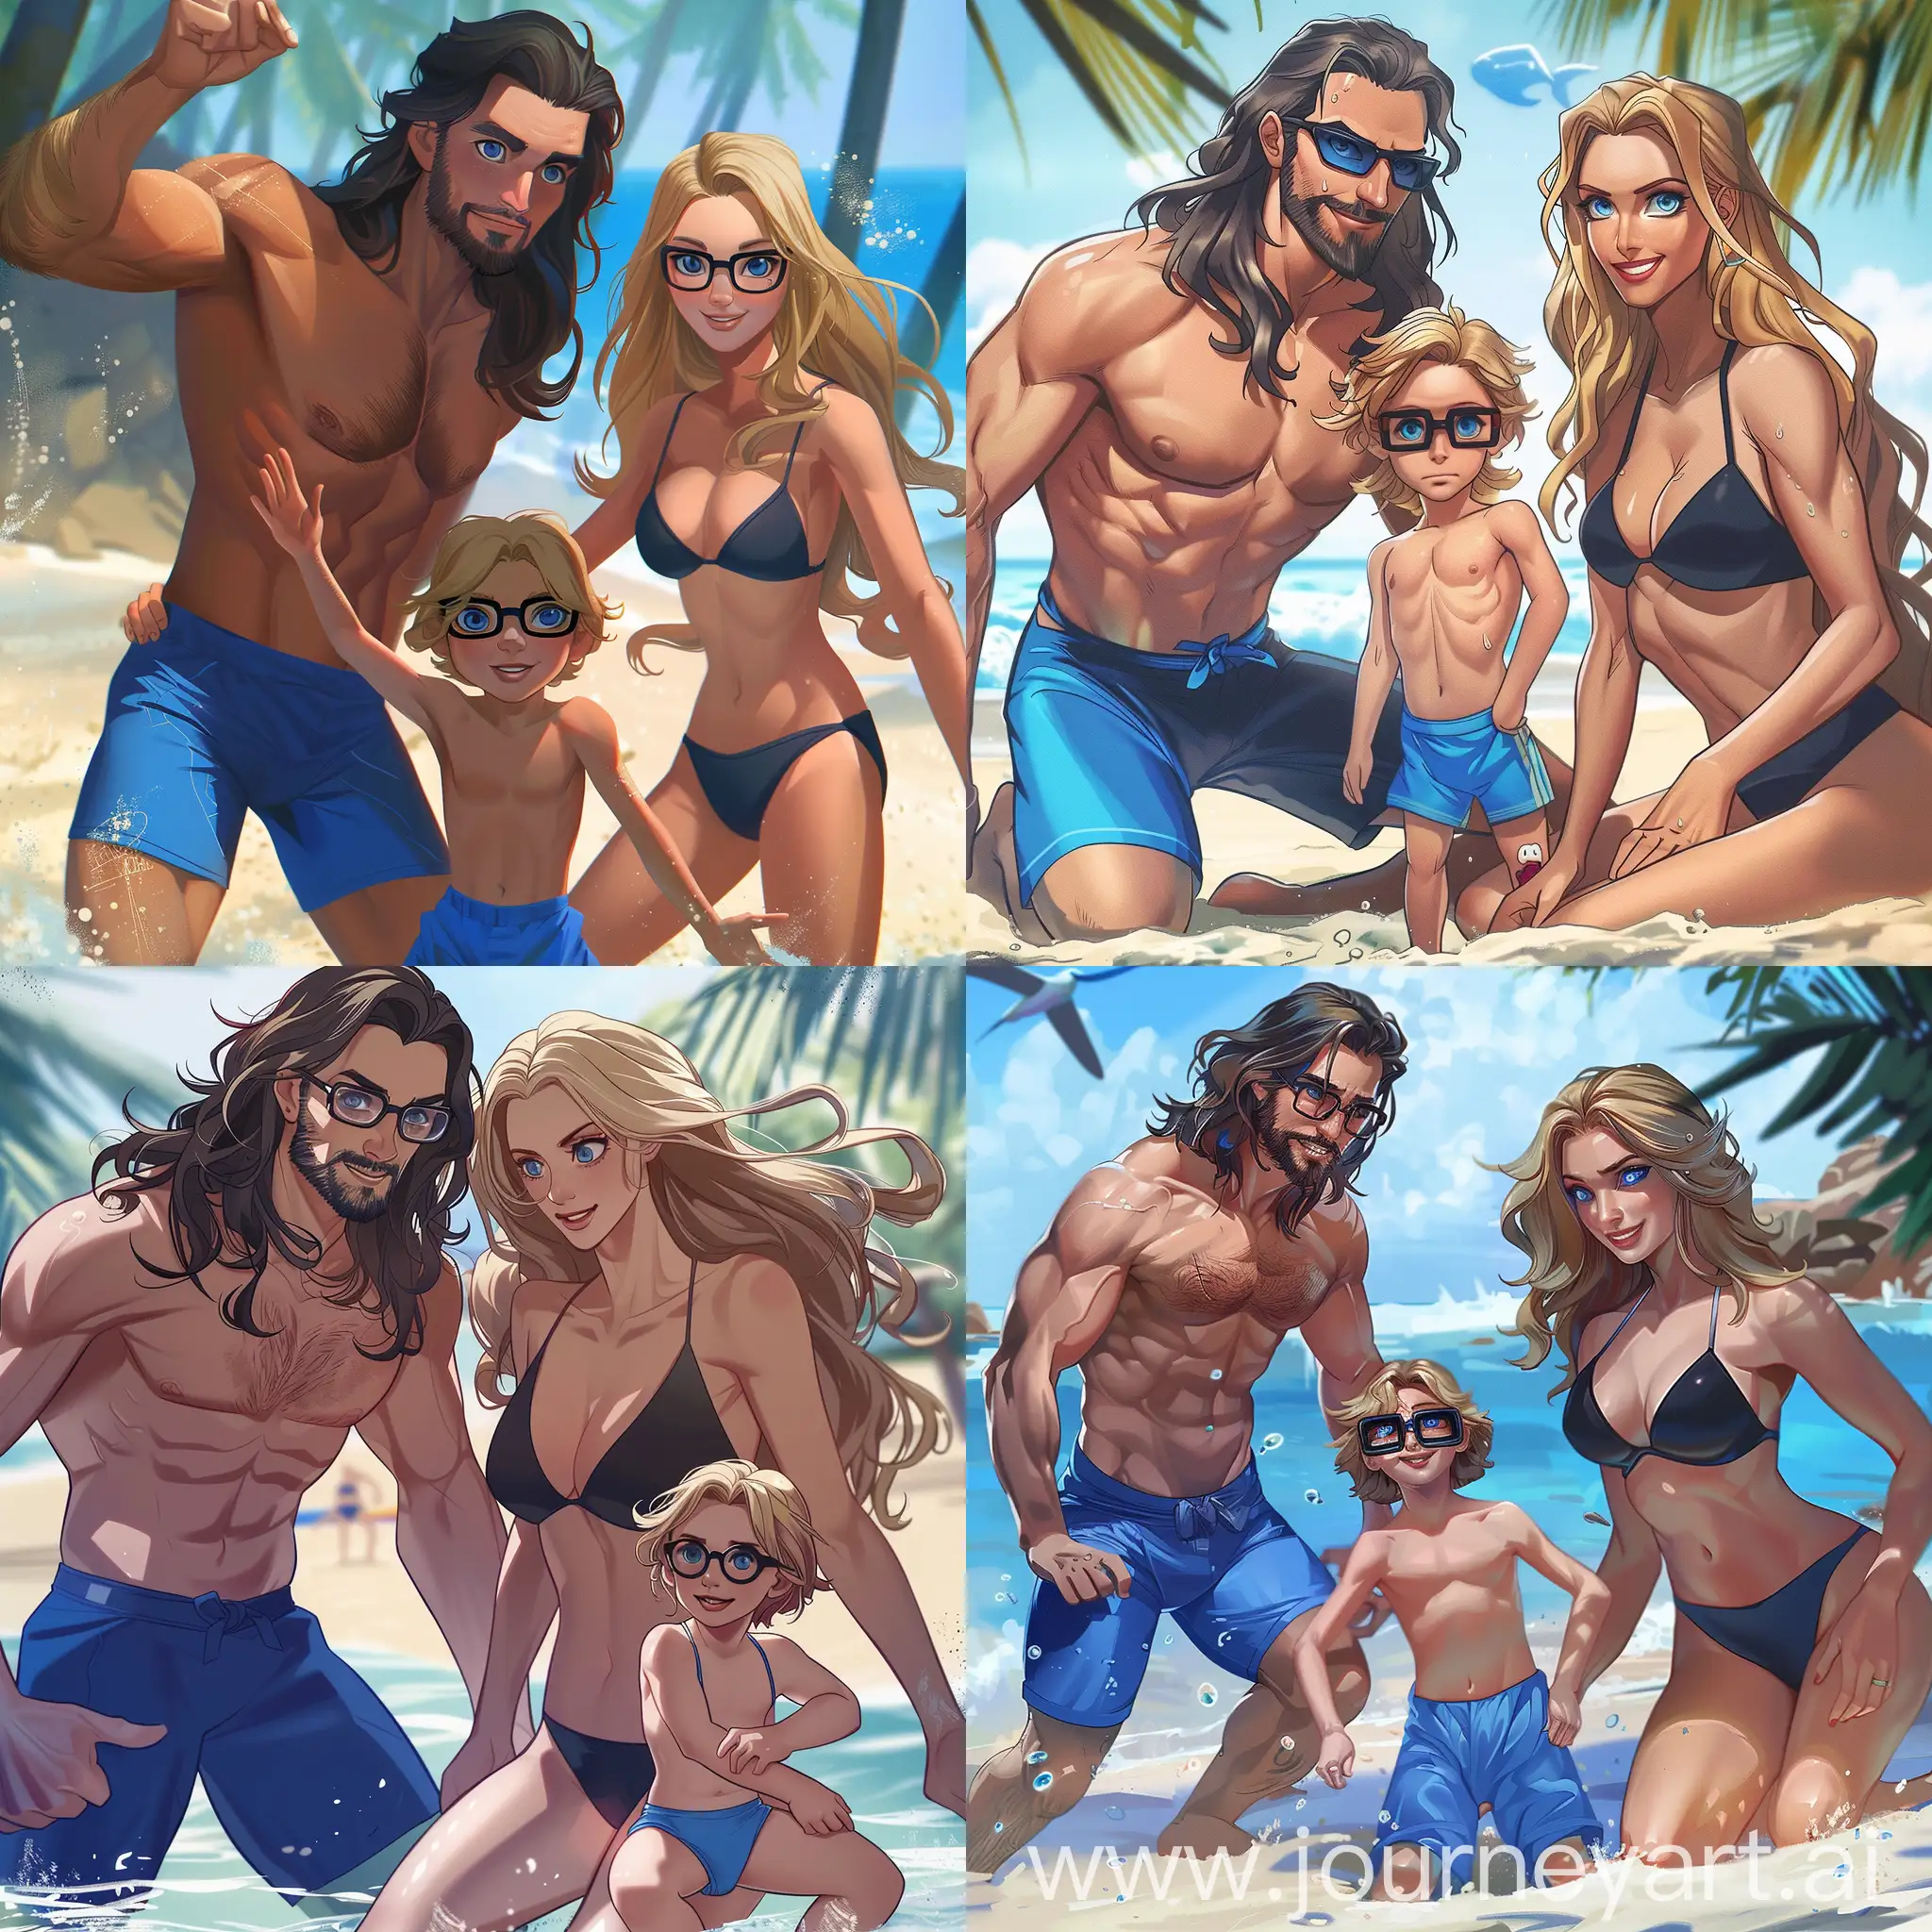 A man with blue eyes, dark long hair, and a beard. Blue swimming trunks. And a woman with blue eyes and long blond hair. Black bikini.  In their forties.
Also a boy, ten years old, with blue eyes, long blond hair to his shoulders, and rectangular black glasses. Blue swimwear.
They are playing on a beach. Disney style.